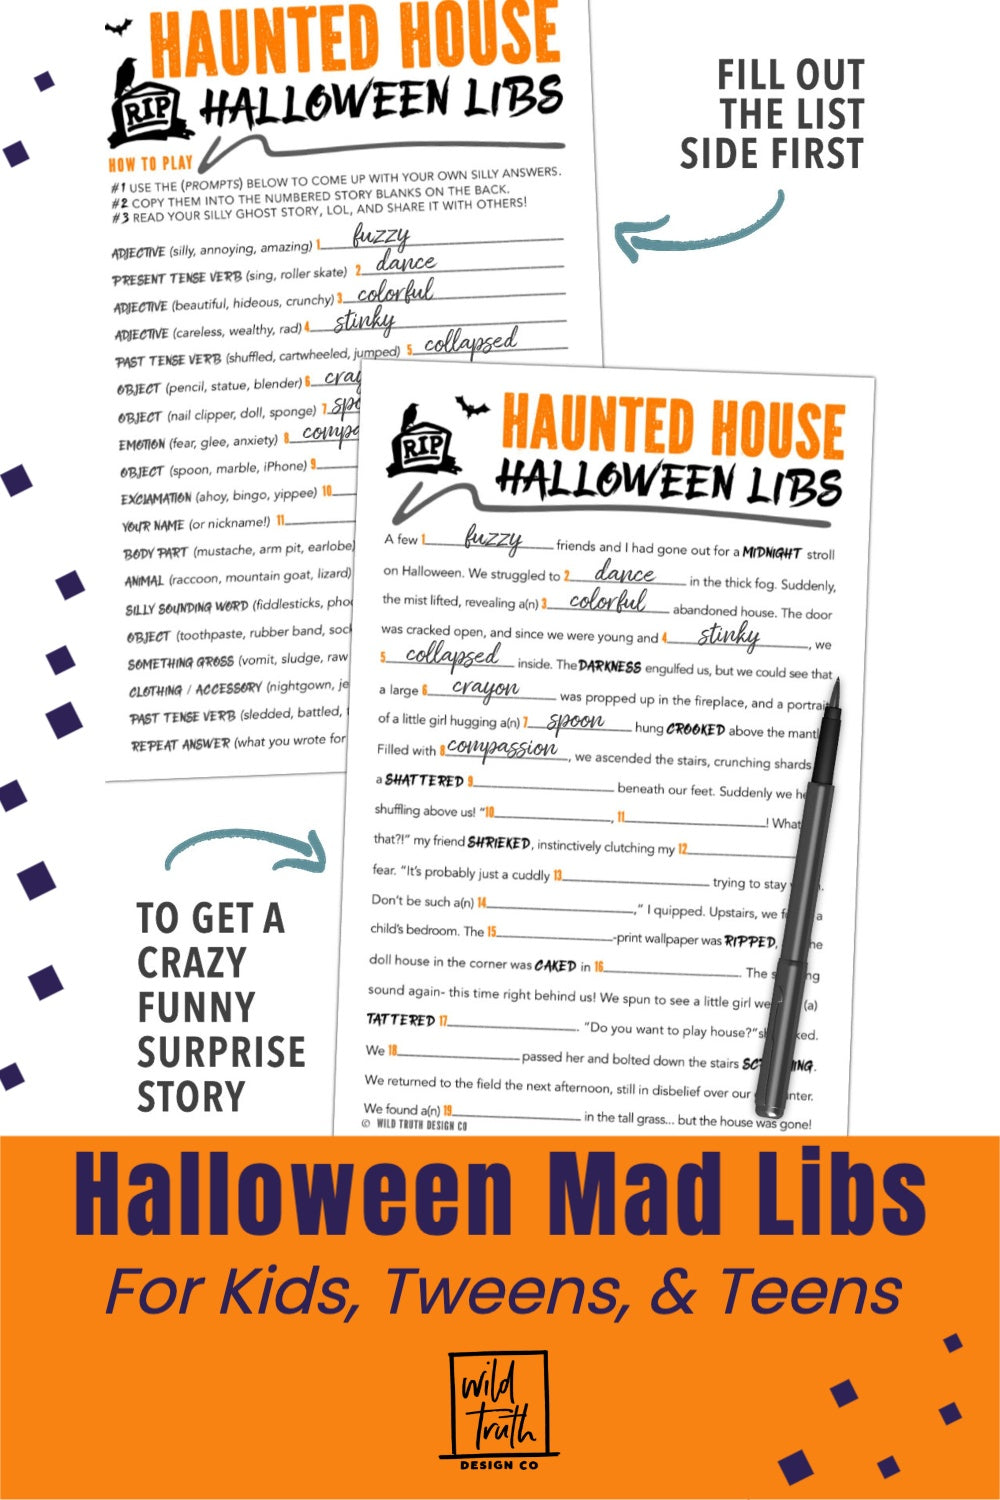 Funny Halloween Mad Lib Game For Kids & Tweens - Haunted House Ghost Story